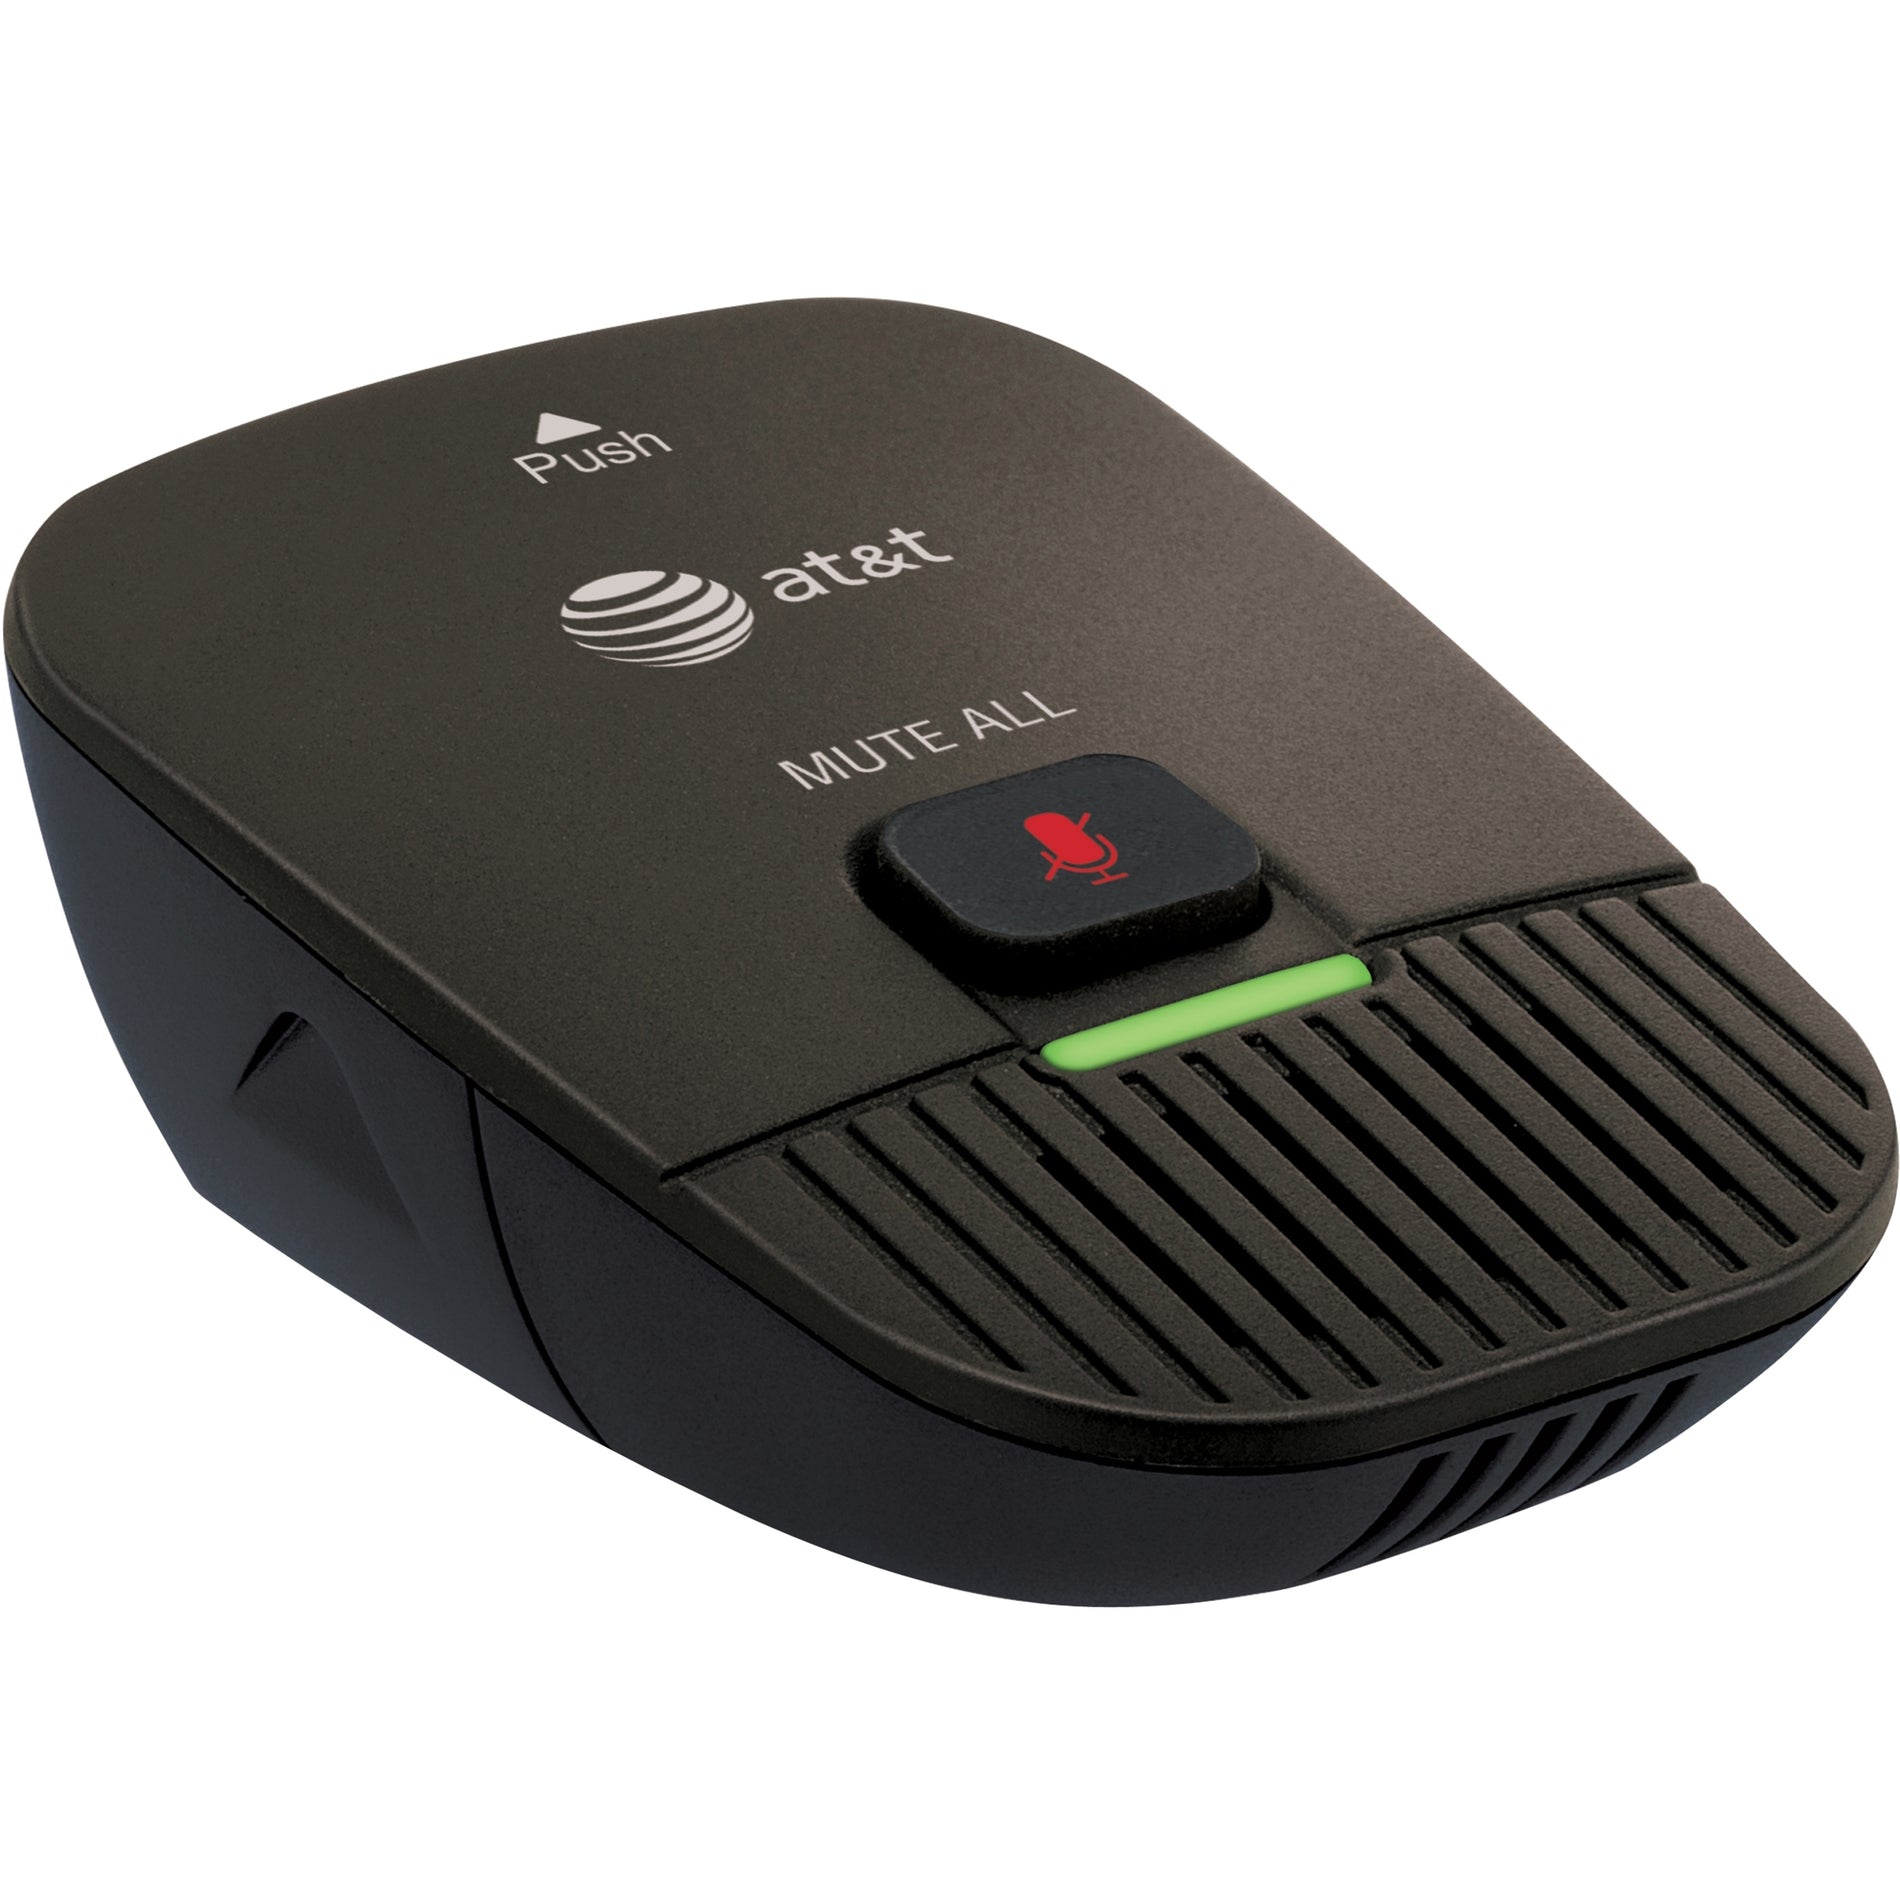 AT&T SB3014 Conference Speakerphone with Wireless Mics, DECT 6.0, 1 Phone Line, 8 Hour Battery Talk Time